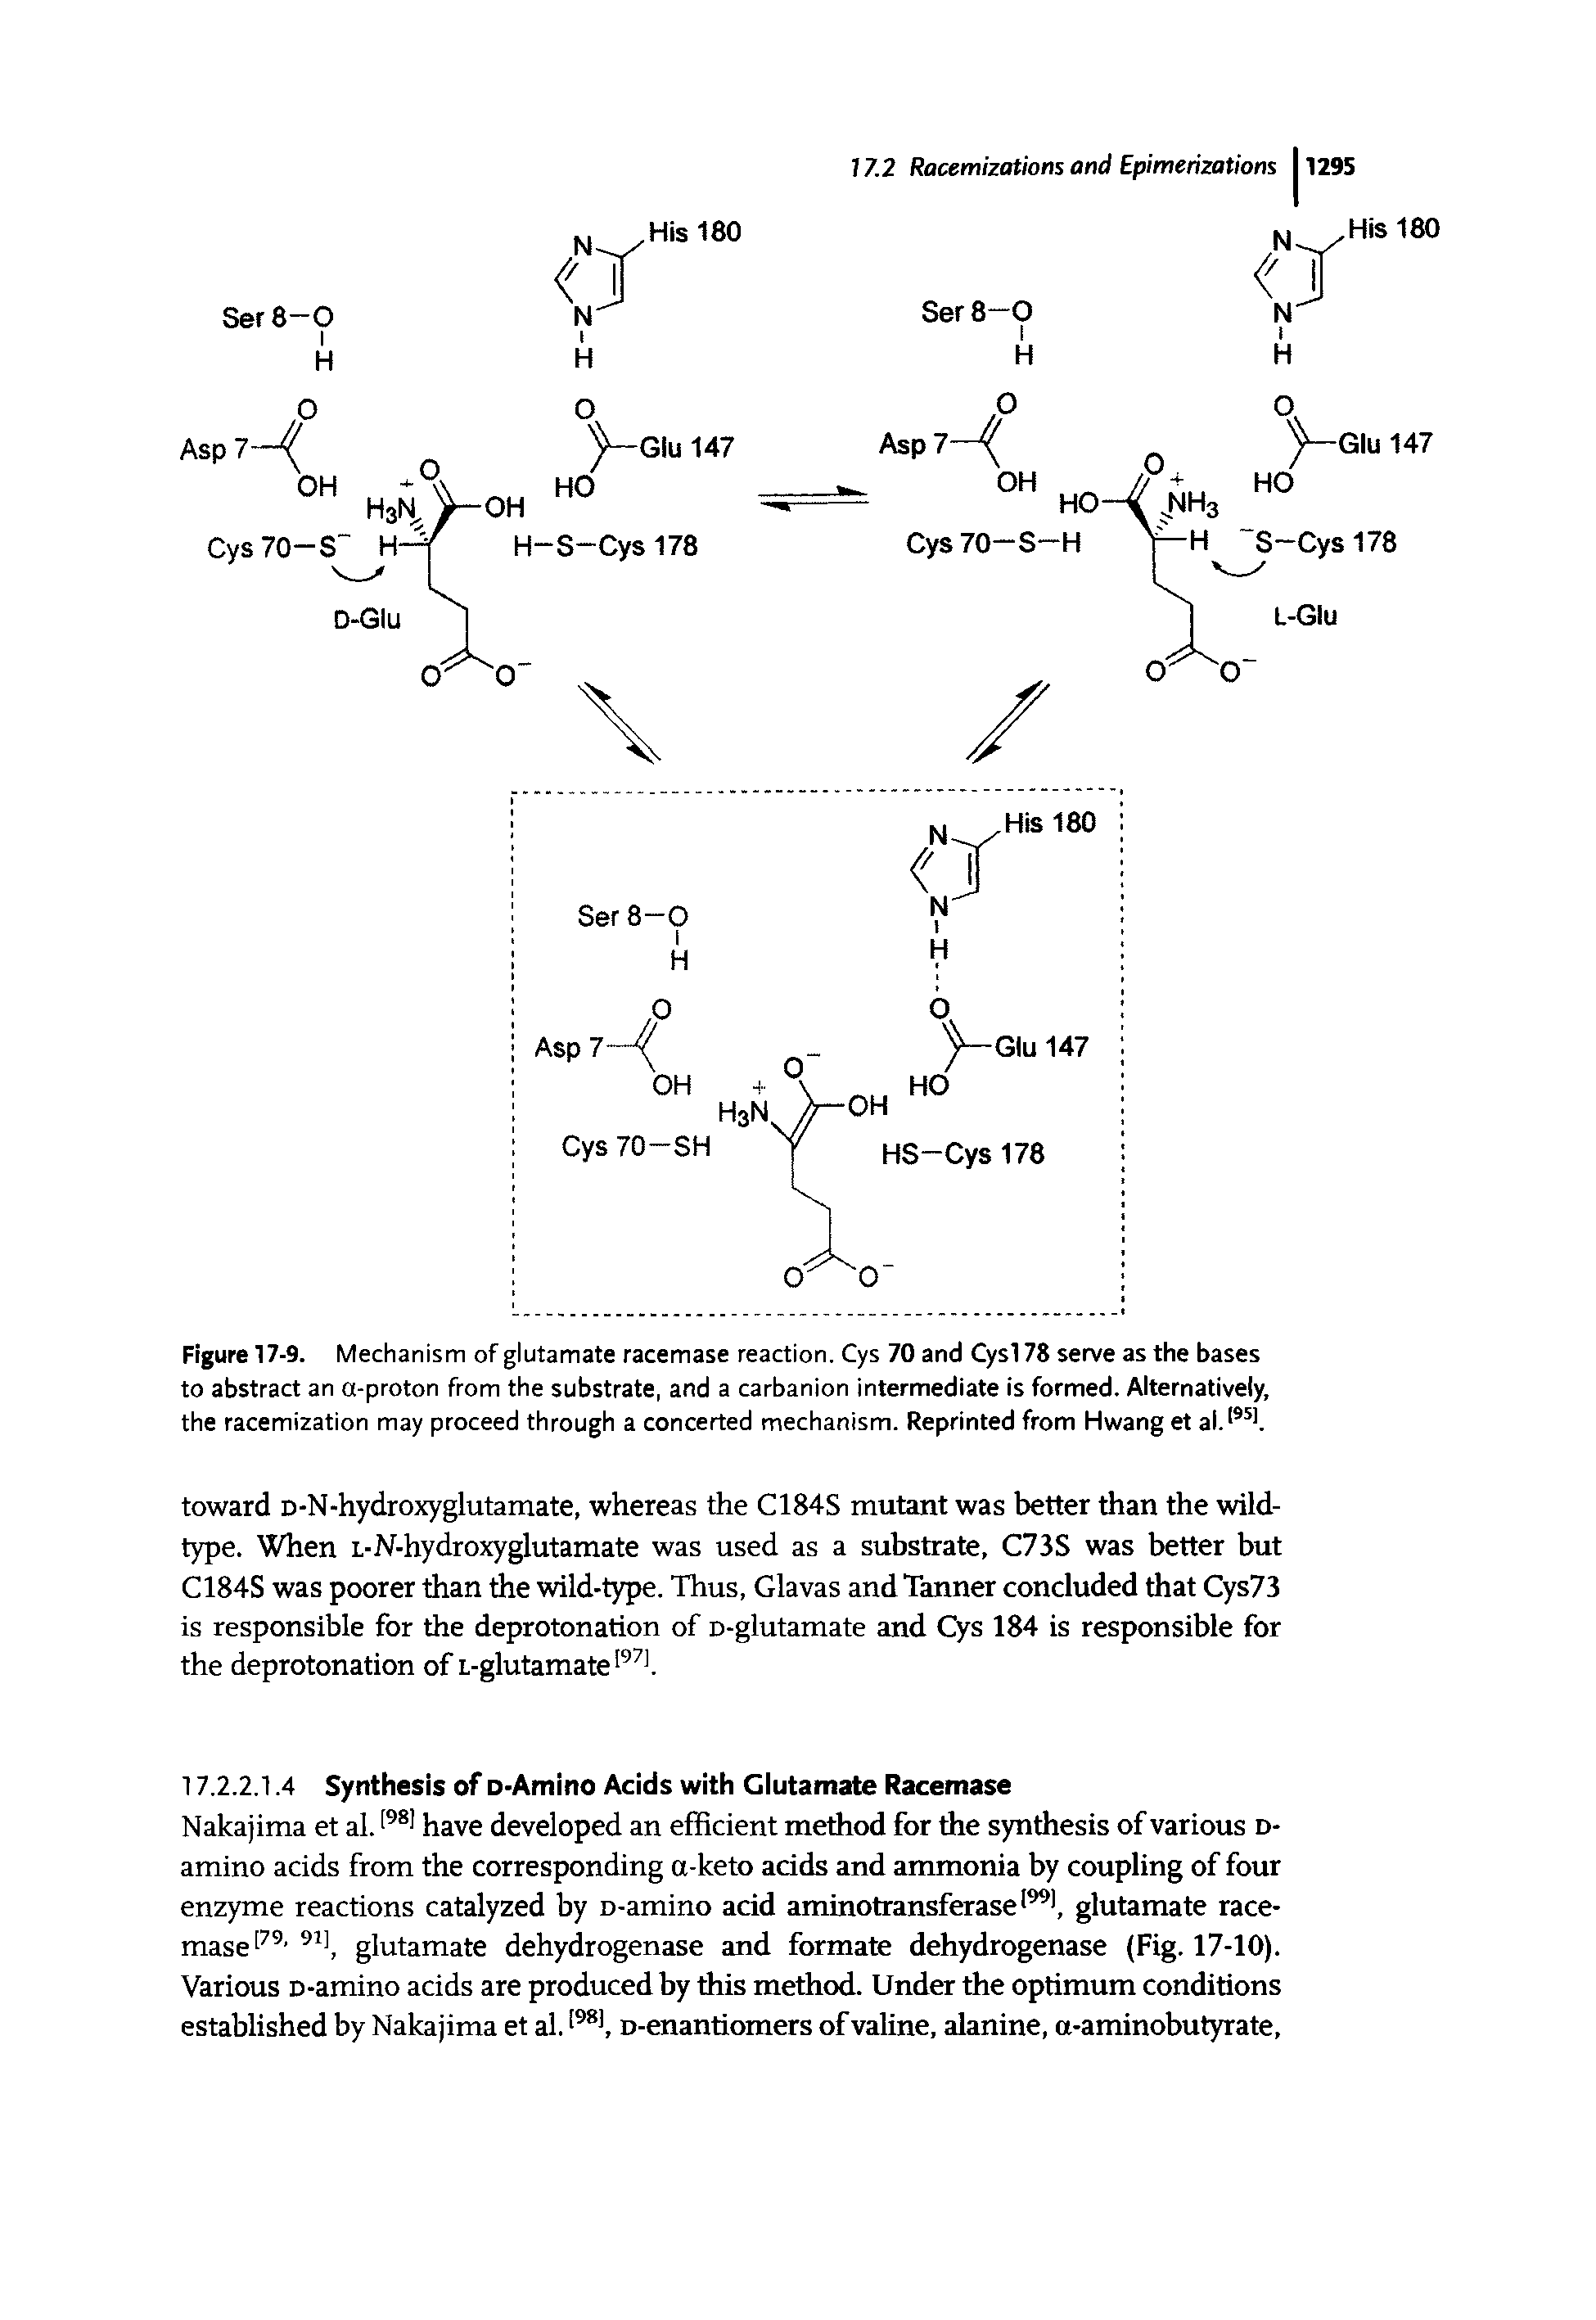 Figure 17-9. Mechanism of glutamate racemase reaction. Cys 70 and Cysl78 serve as the bases to abstract an a-proton from the substrate, and a carbanion intermediate is formed. Alternatively, the racemization may proceed through a concerted mechanism. Reprinted from Hwang et al. 951.